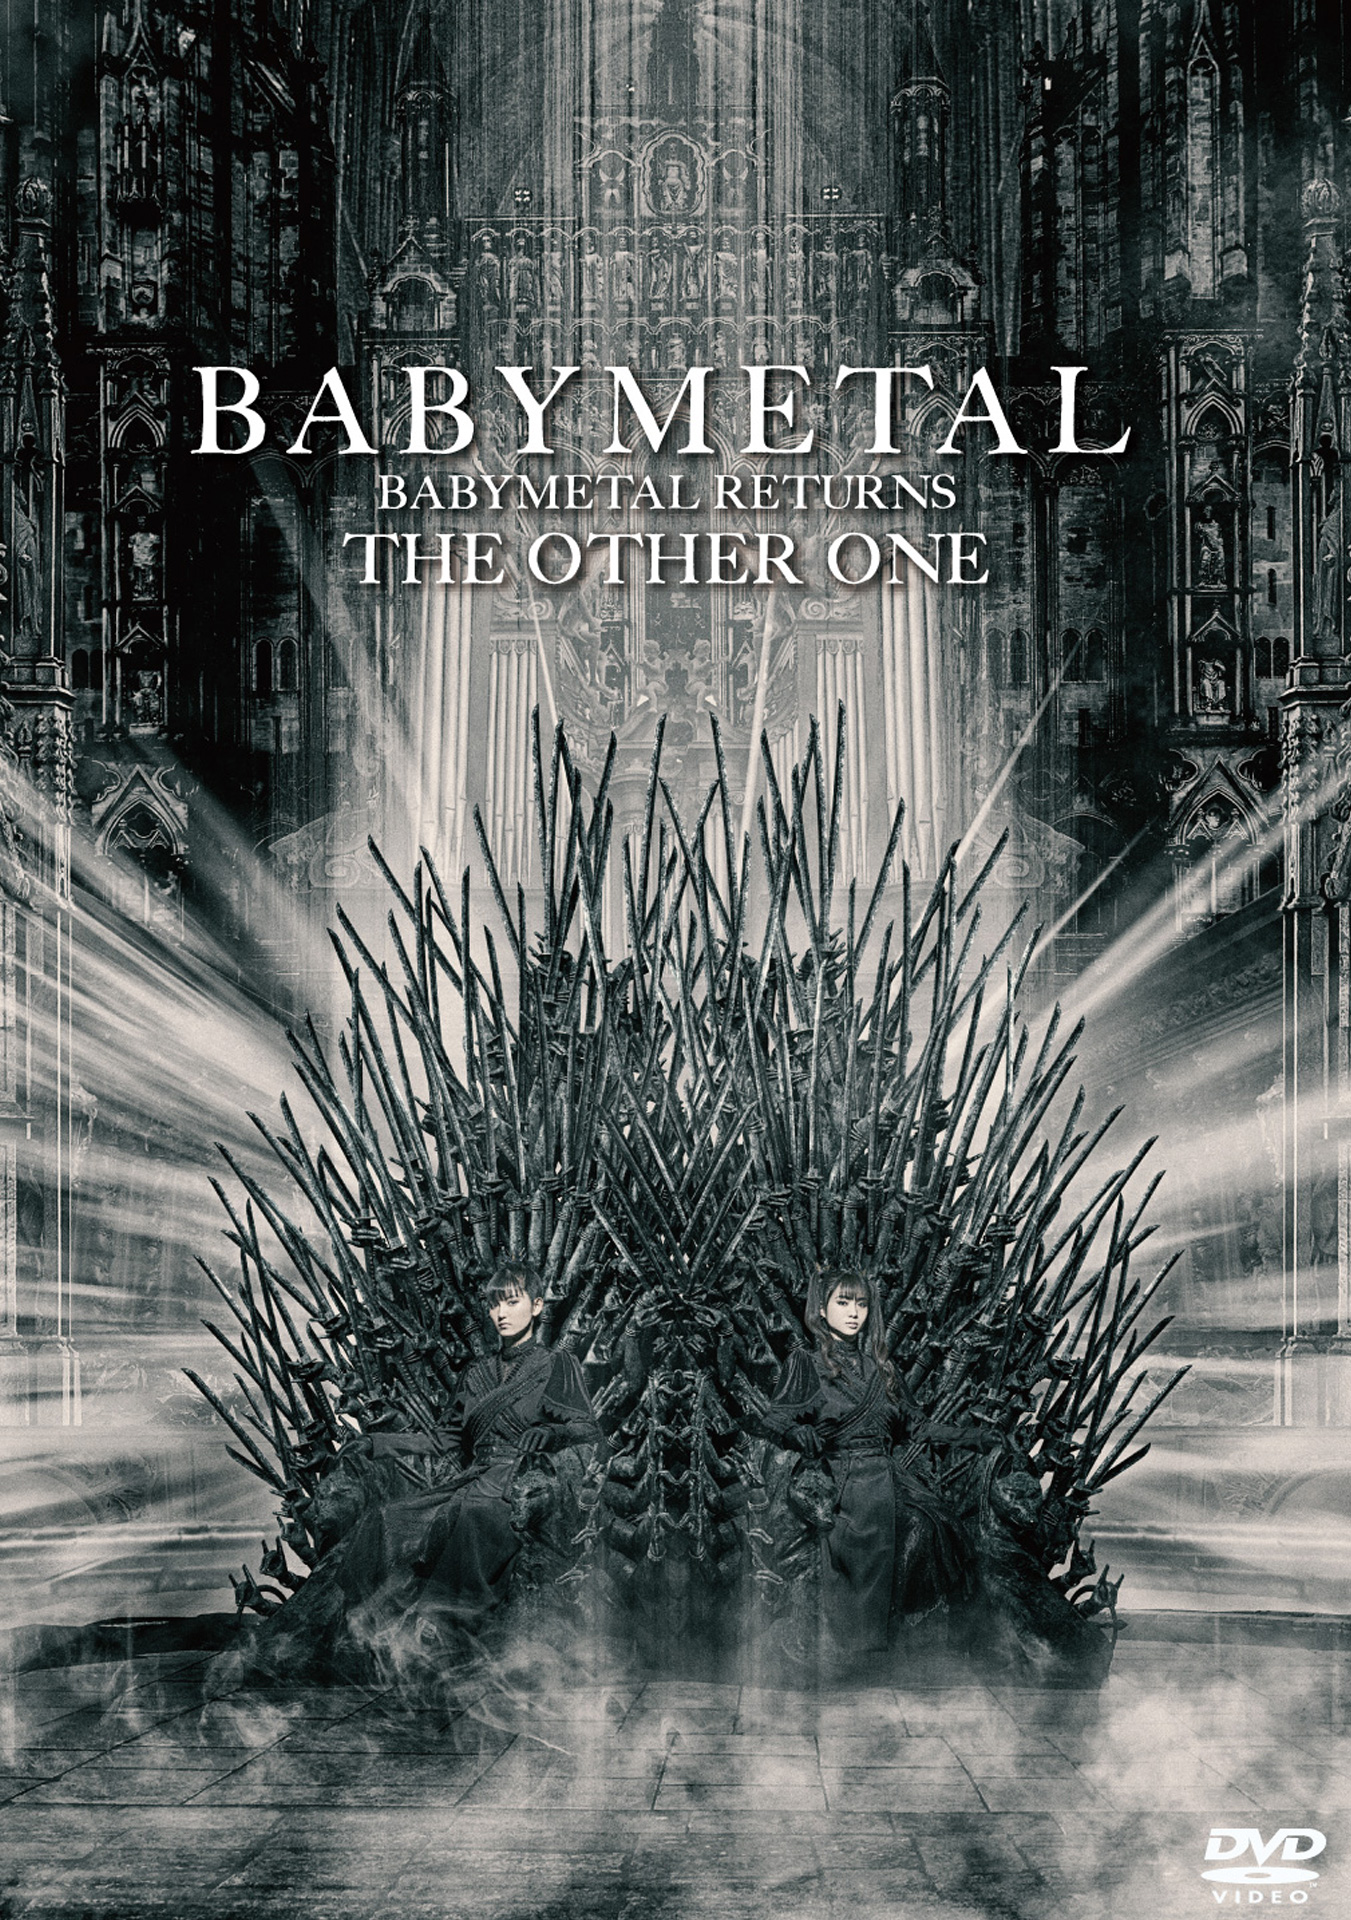 『BABYMETAL RETURNS - THE OTHER ONE -』DVD（通常盤）ジャケット